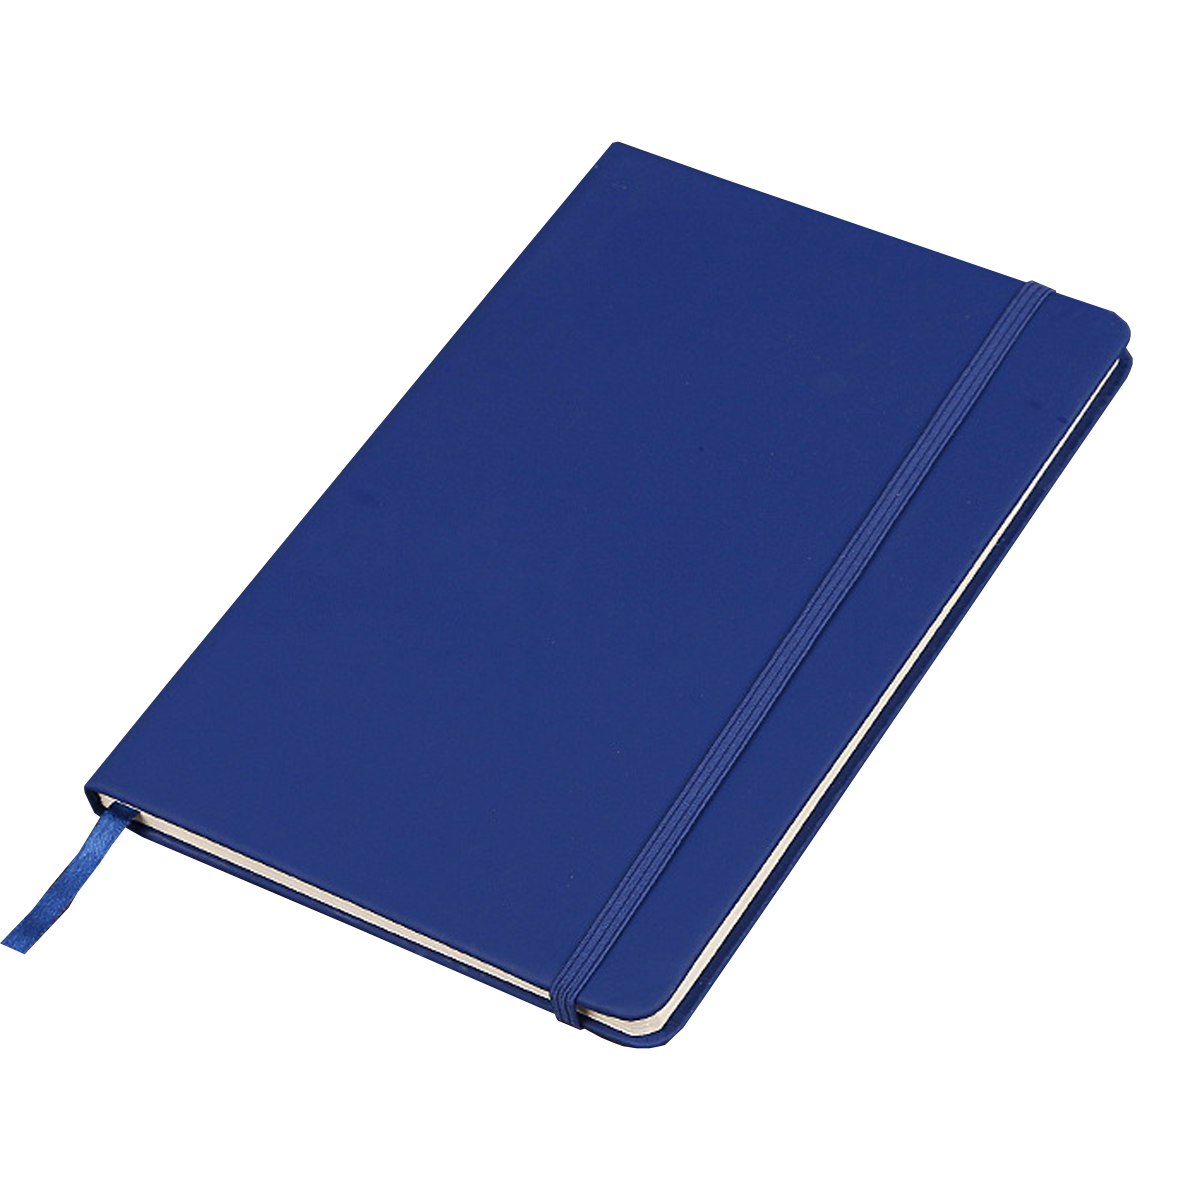 Olmecs PU Soft Leather Covered Notebook With Elastic Strap - Blue